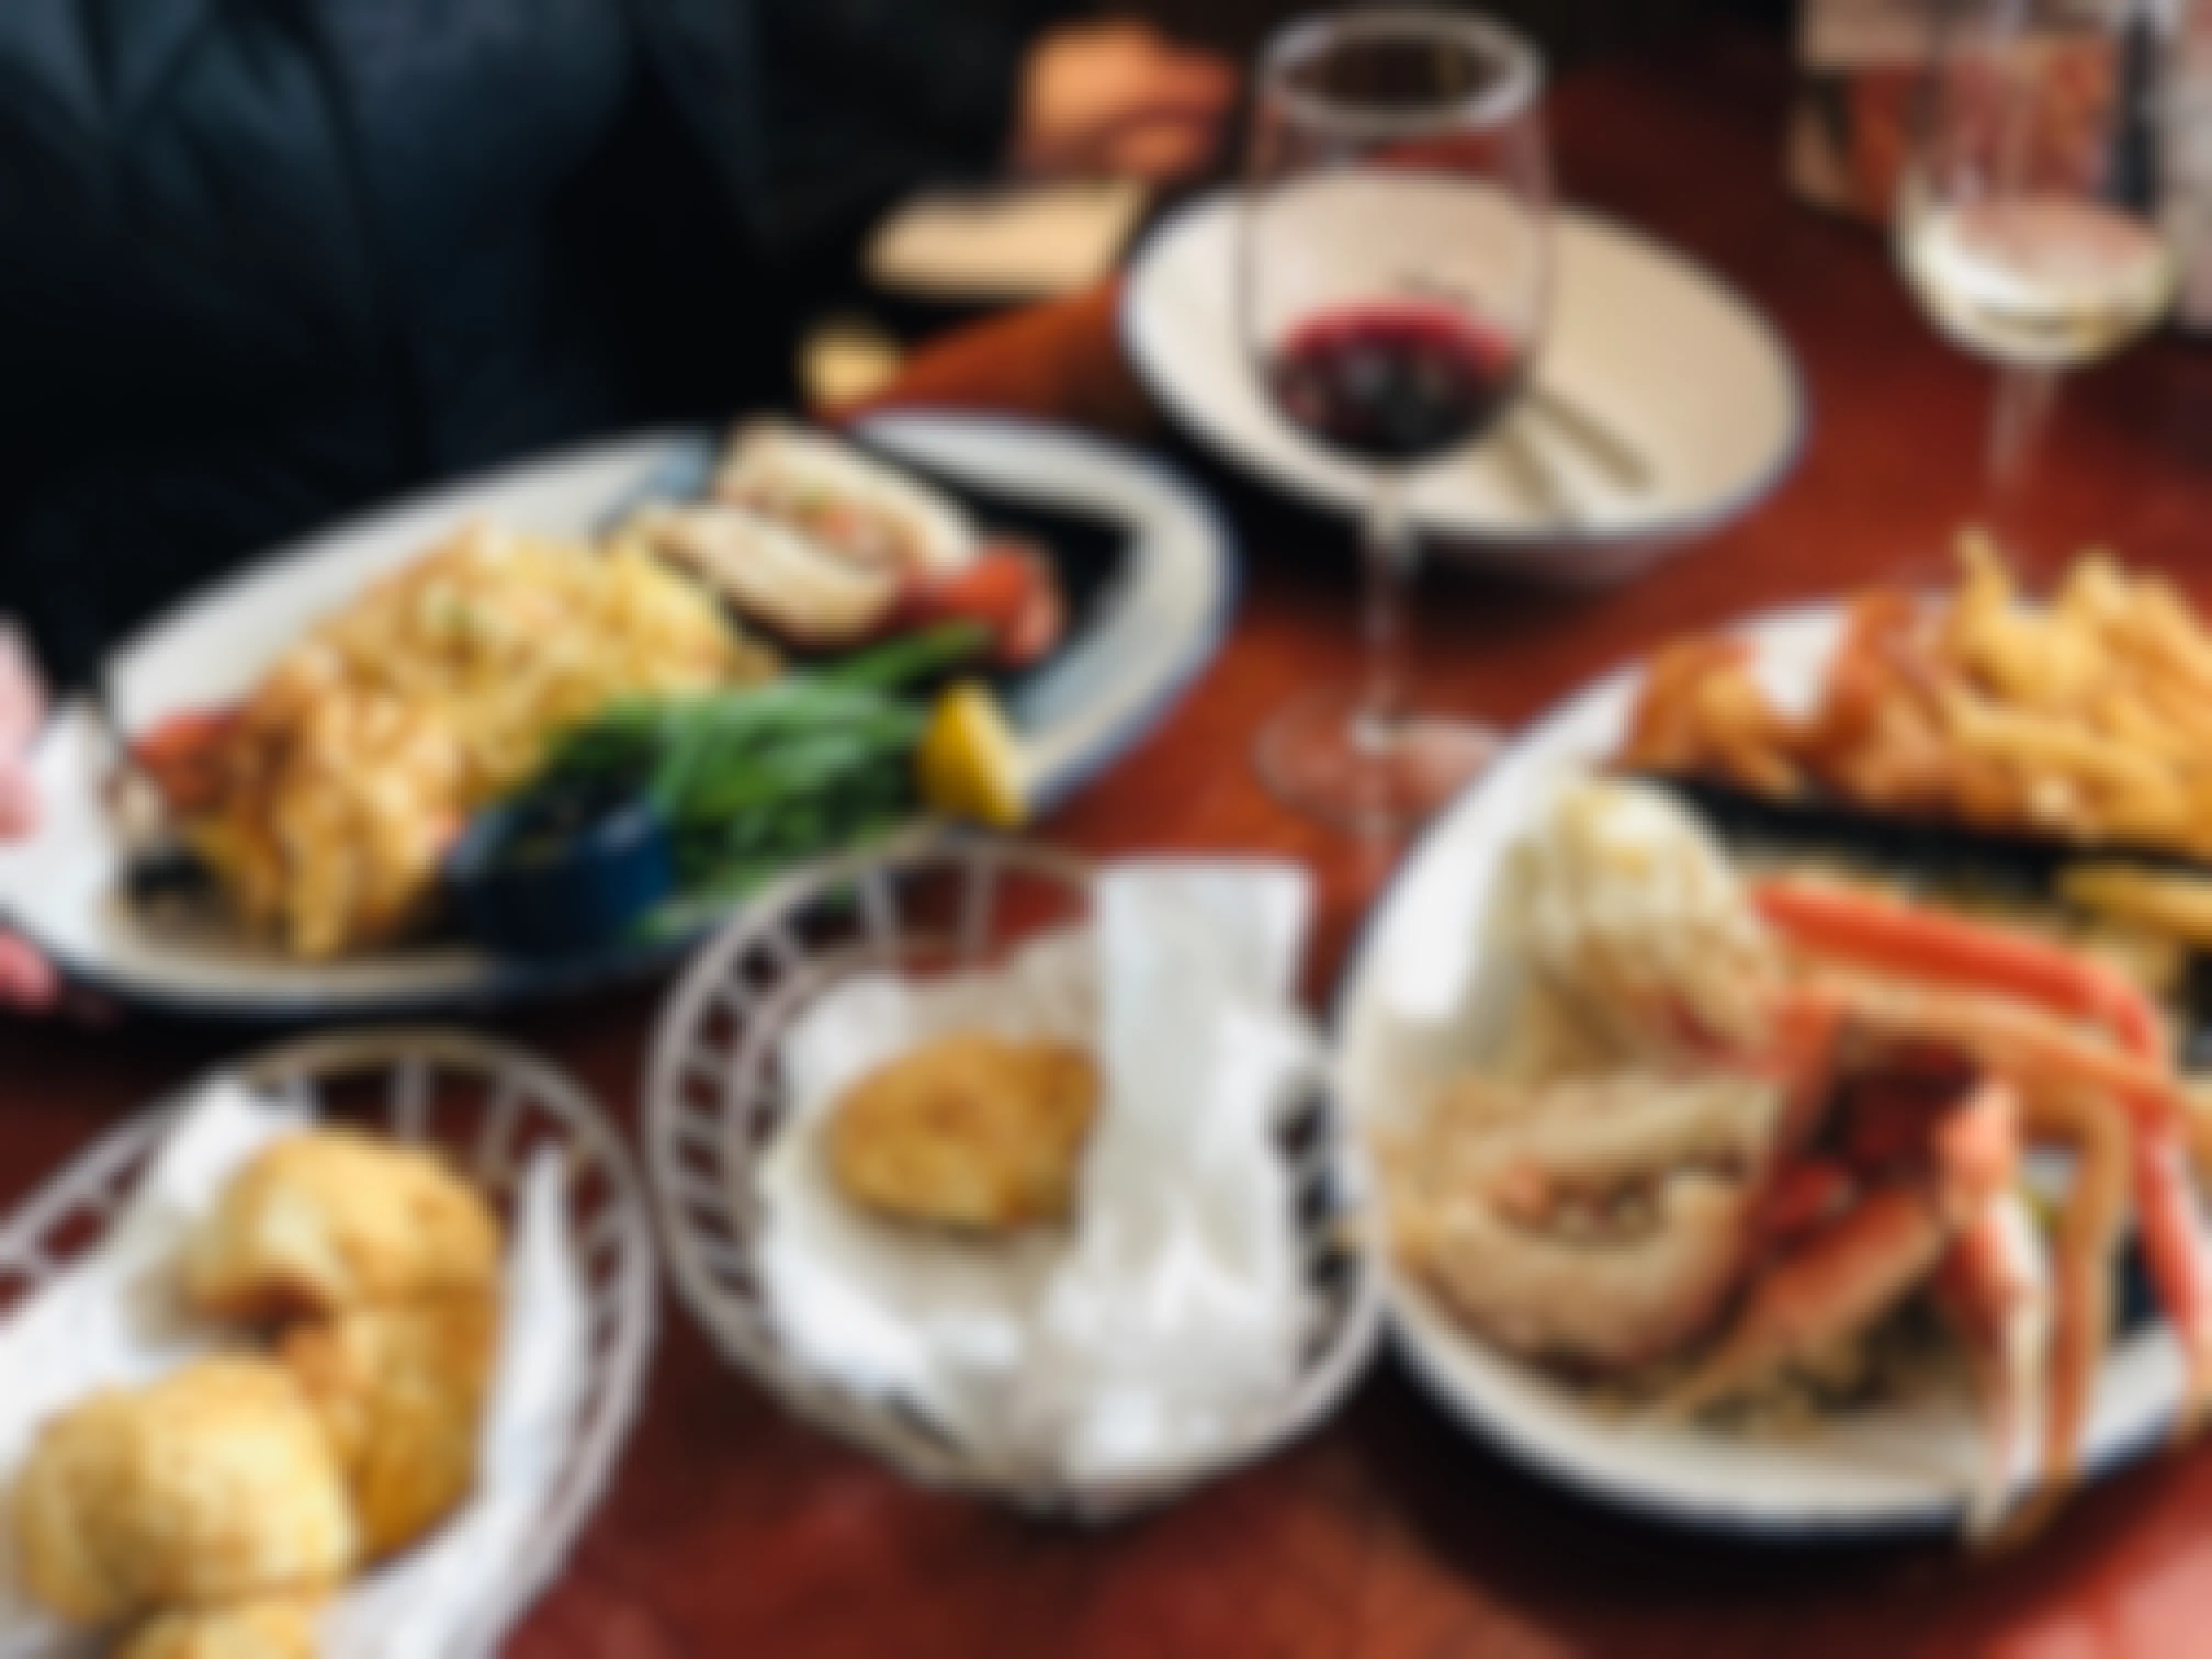 Lobsterfest Prices & Savings You Should Know to Save Big at Red Lobster